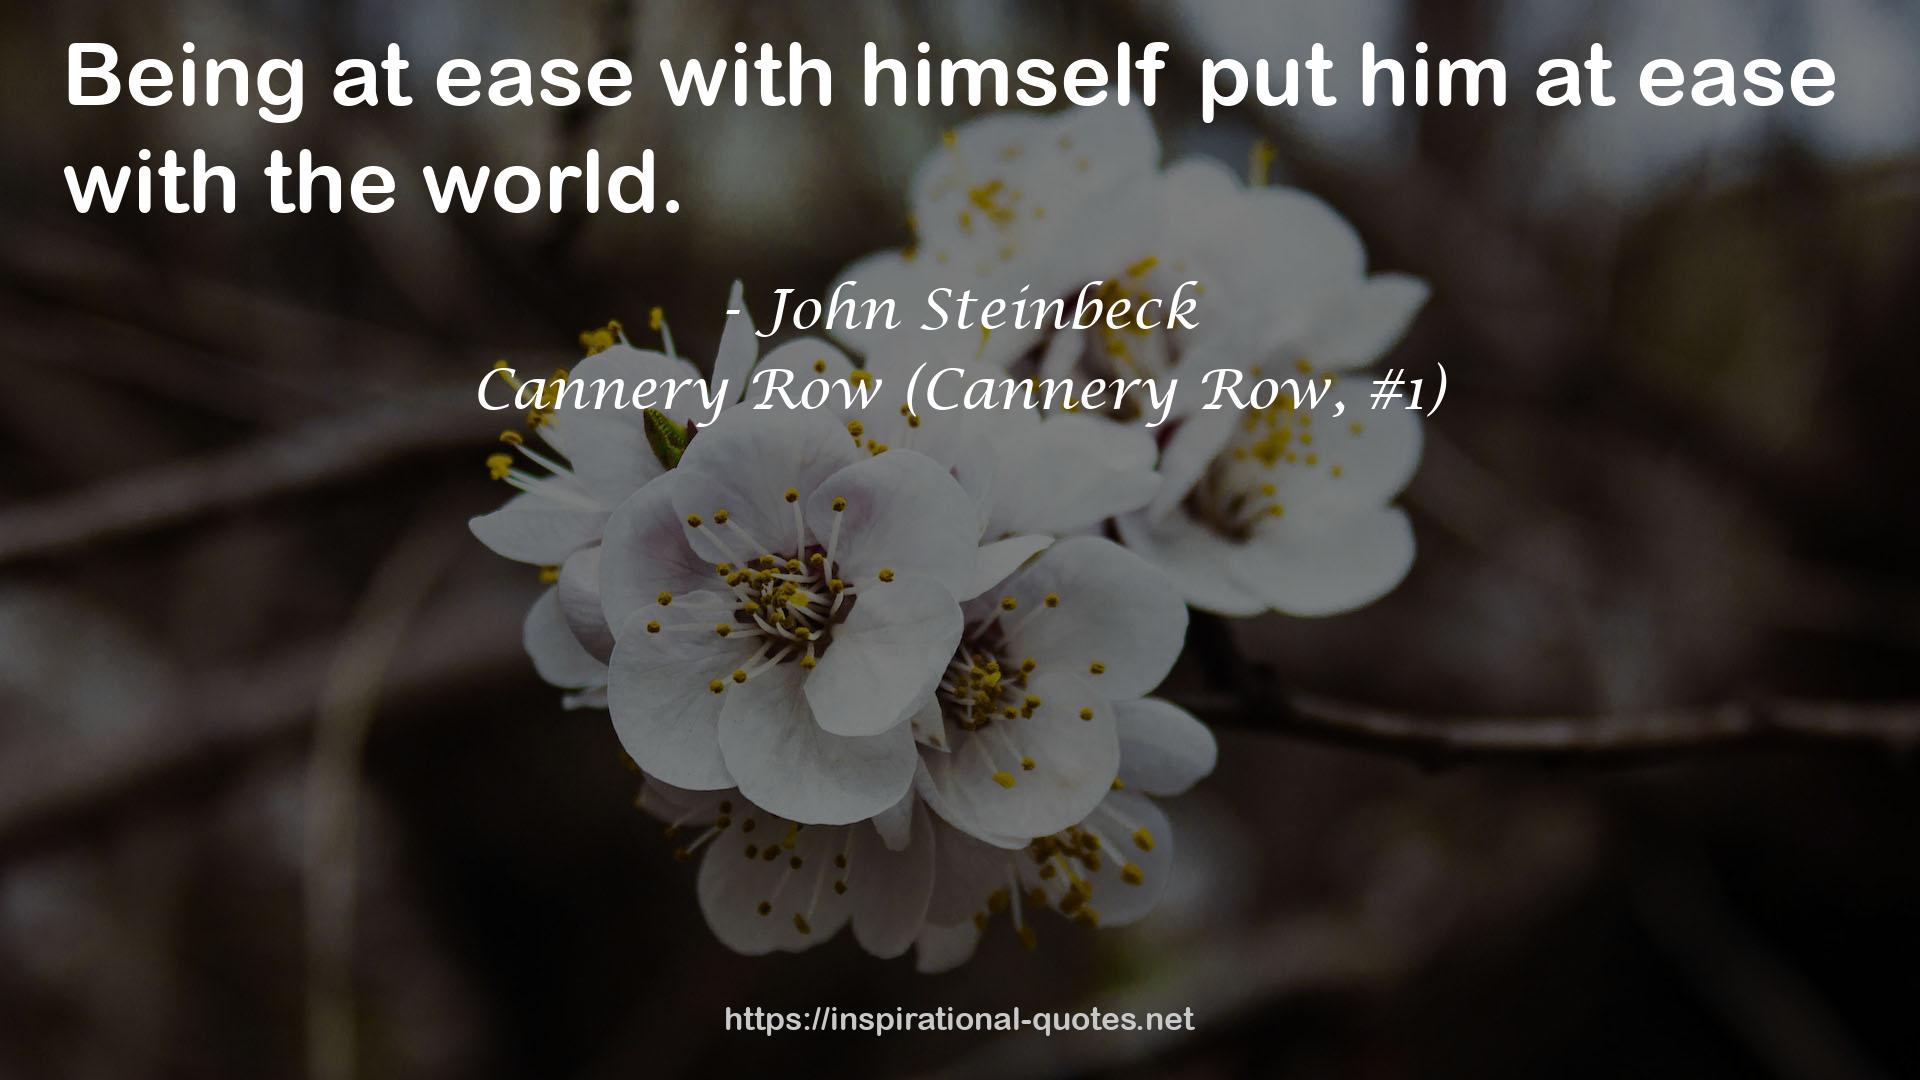 Cannery Row (Cannery Row, #1) QUOTES